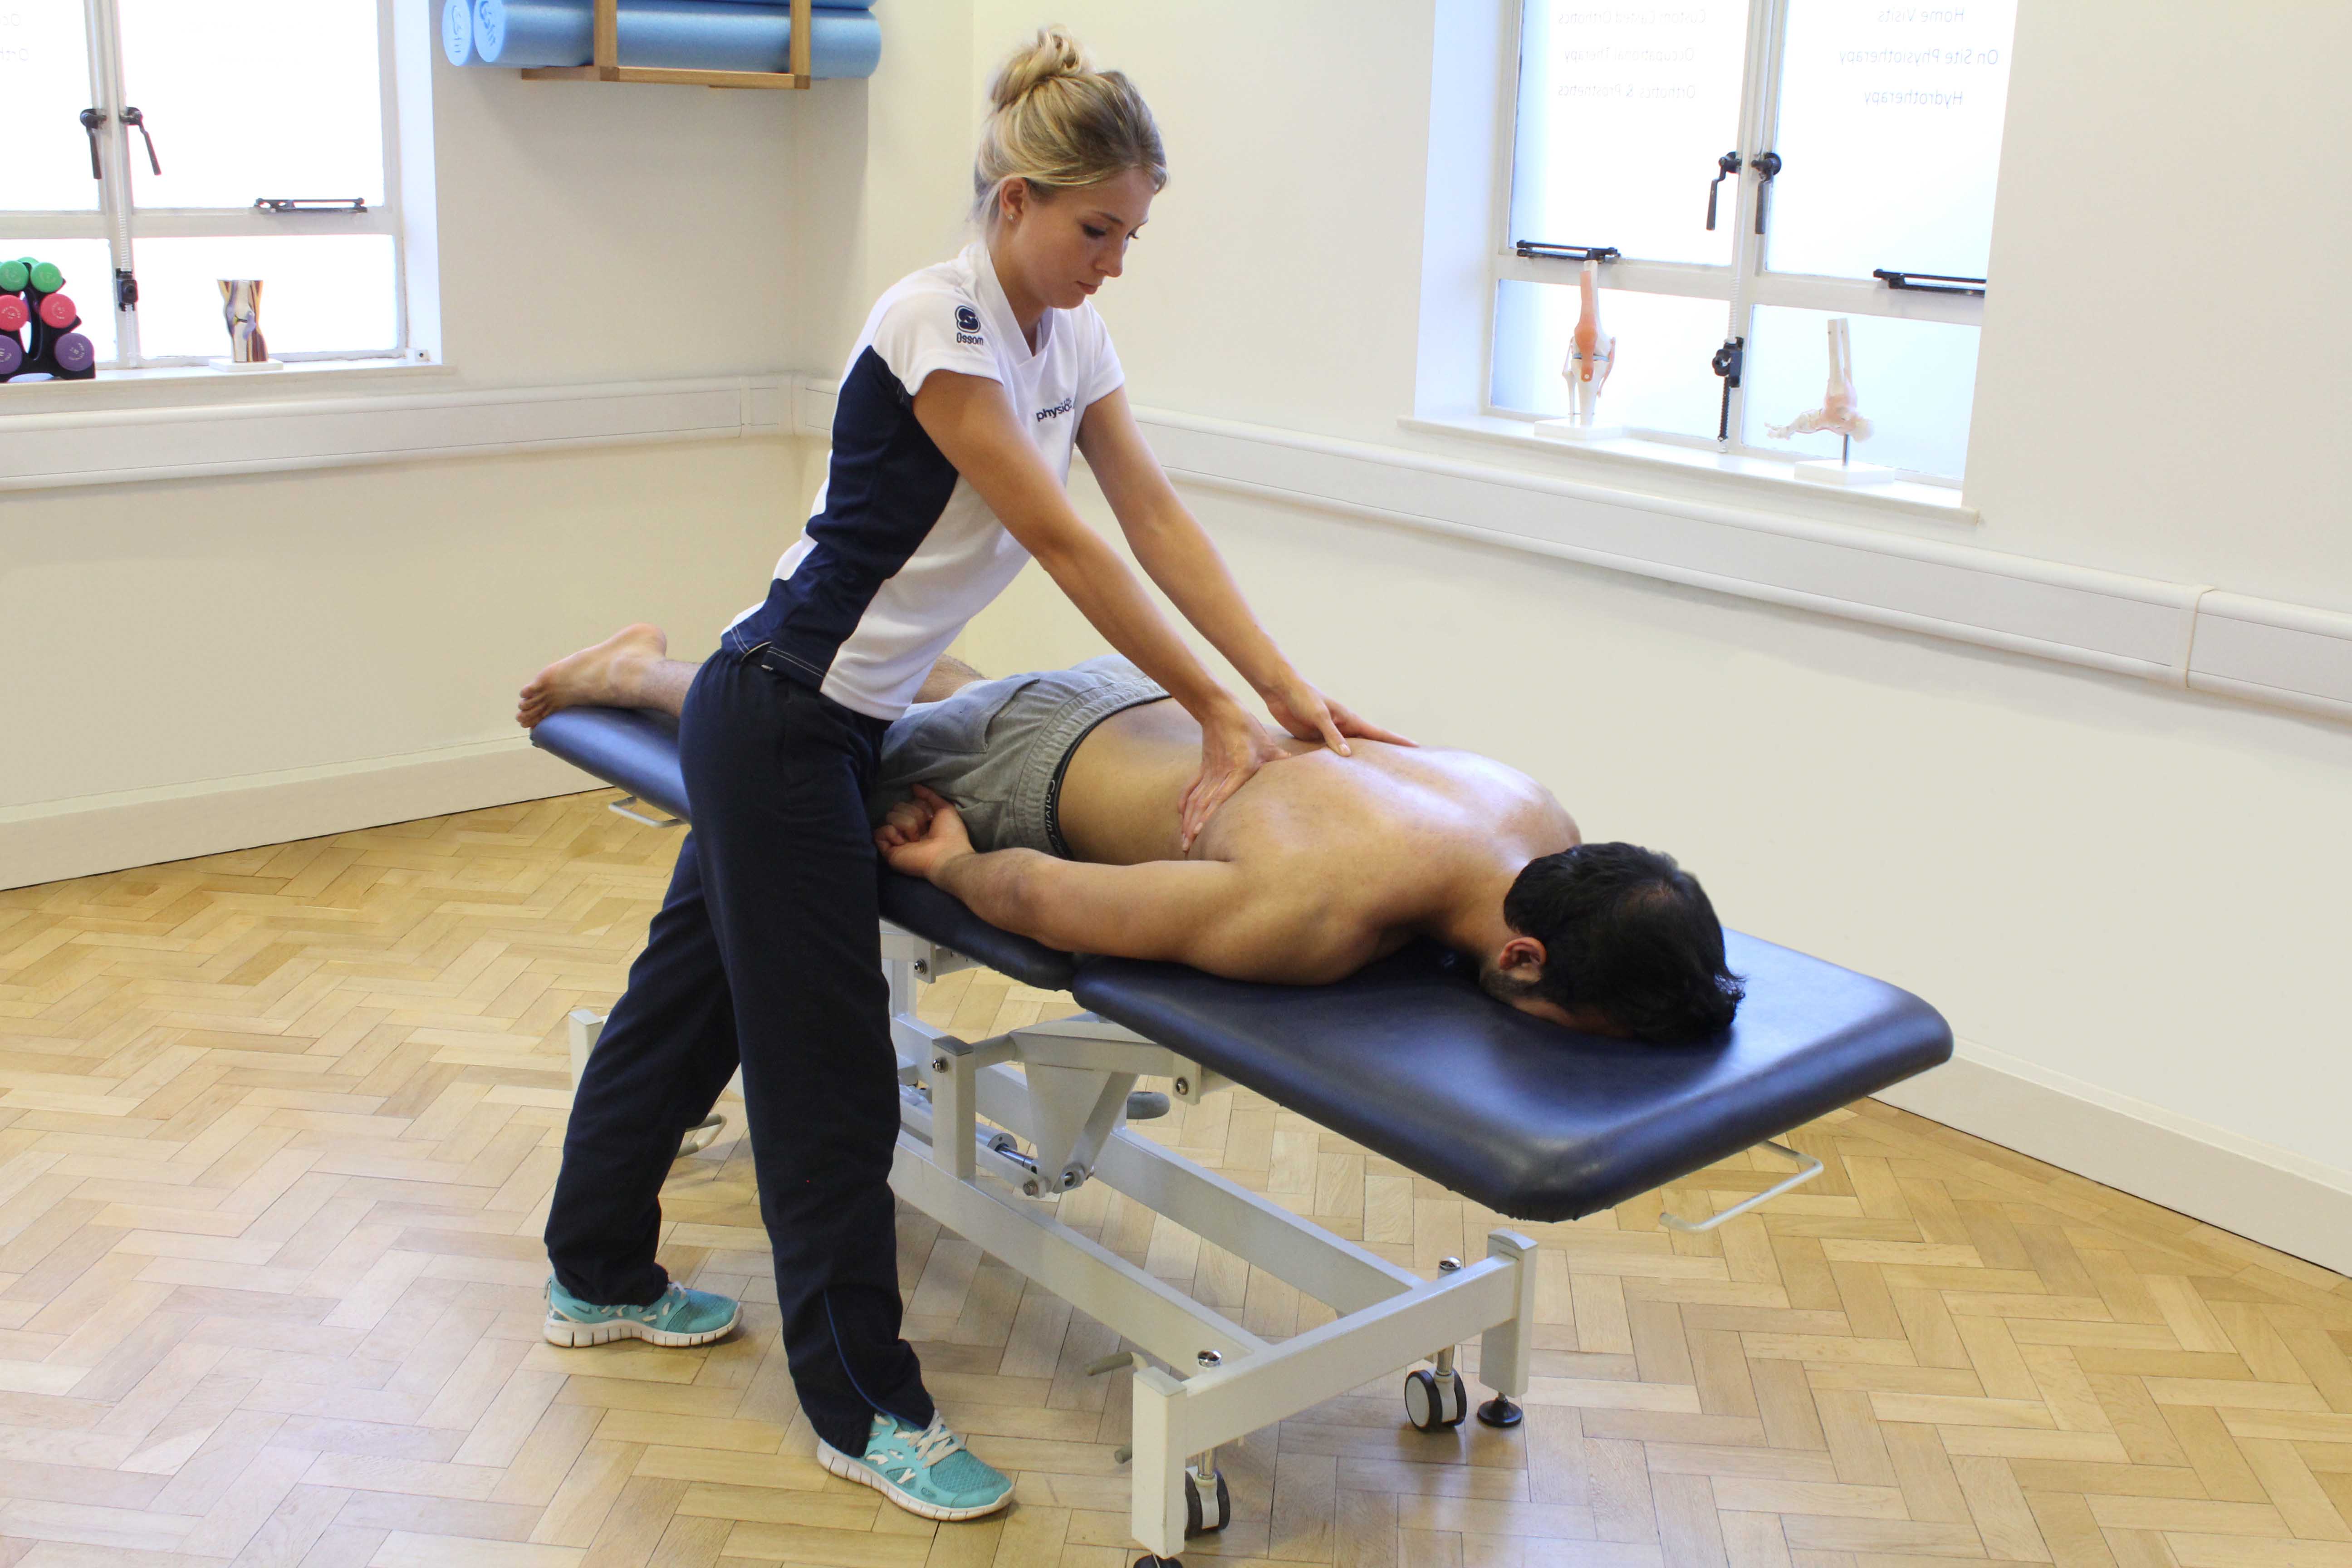 Trigger point massage of the thoracic vertebrea to relieve pain and stiffness